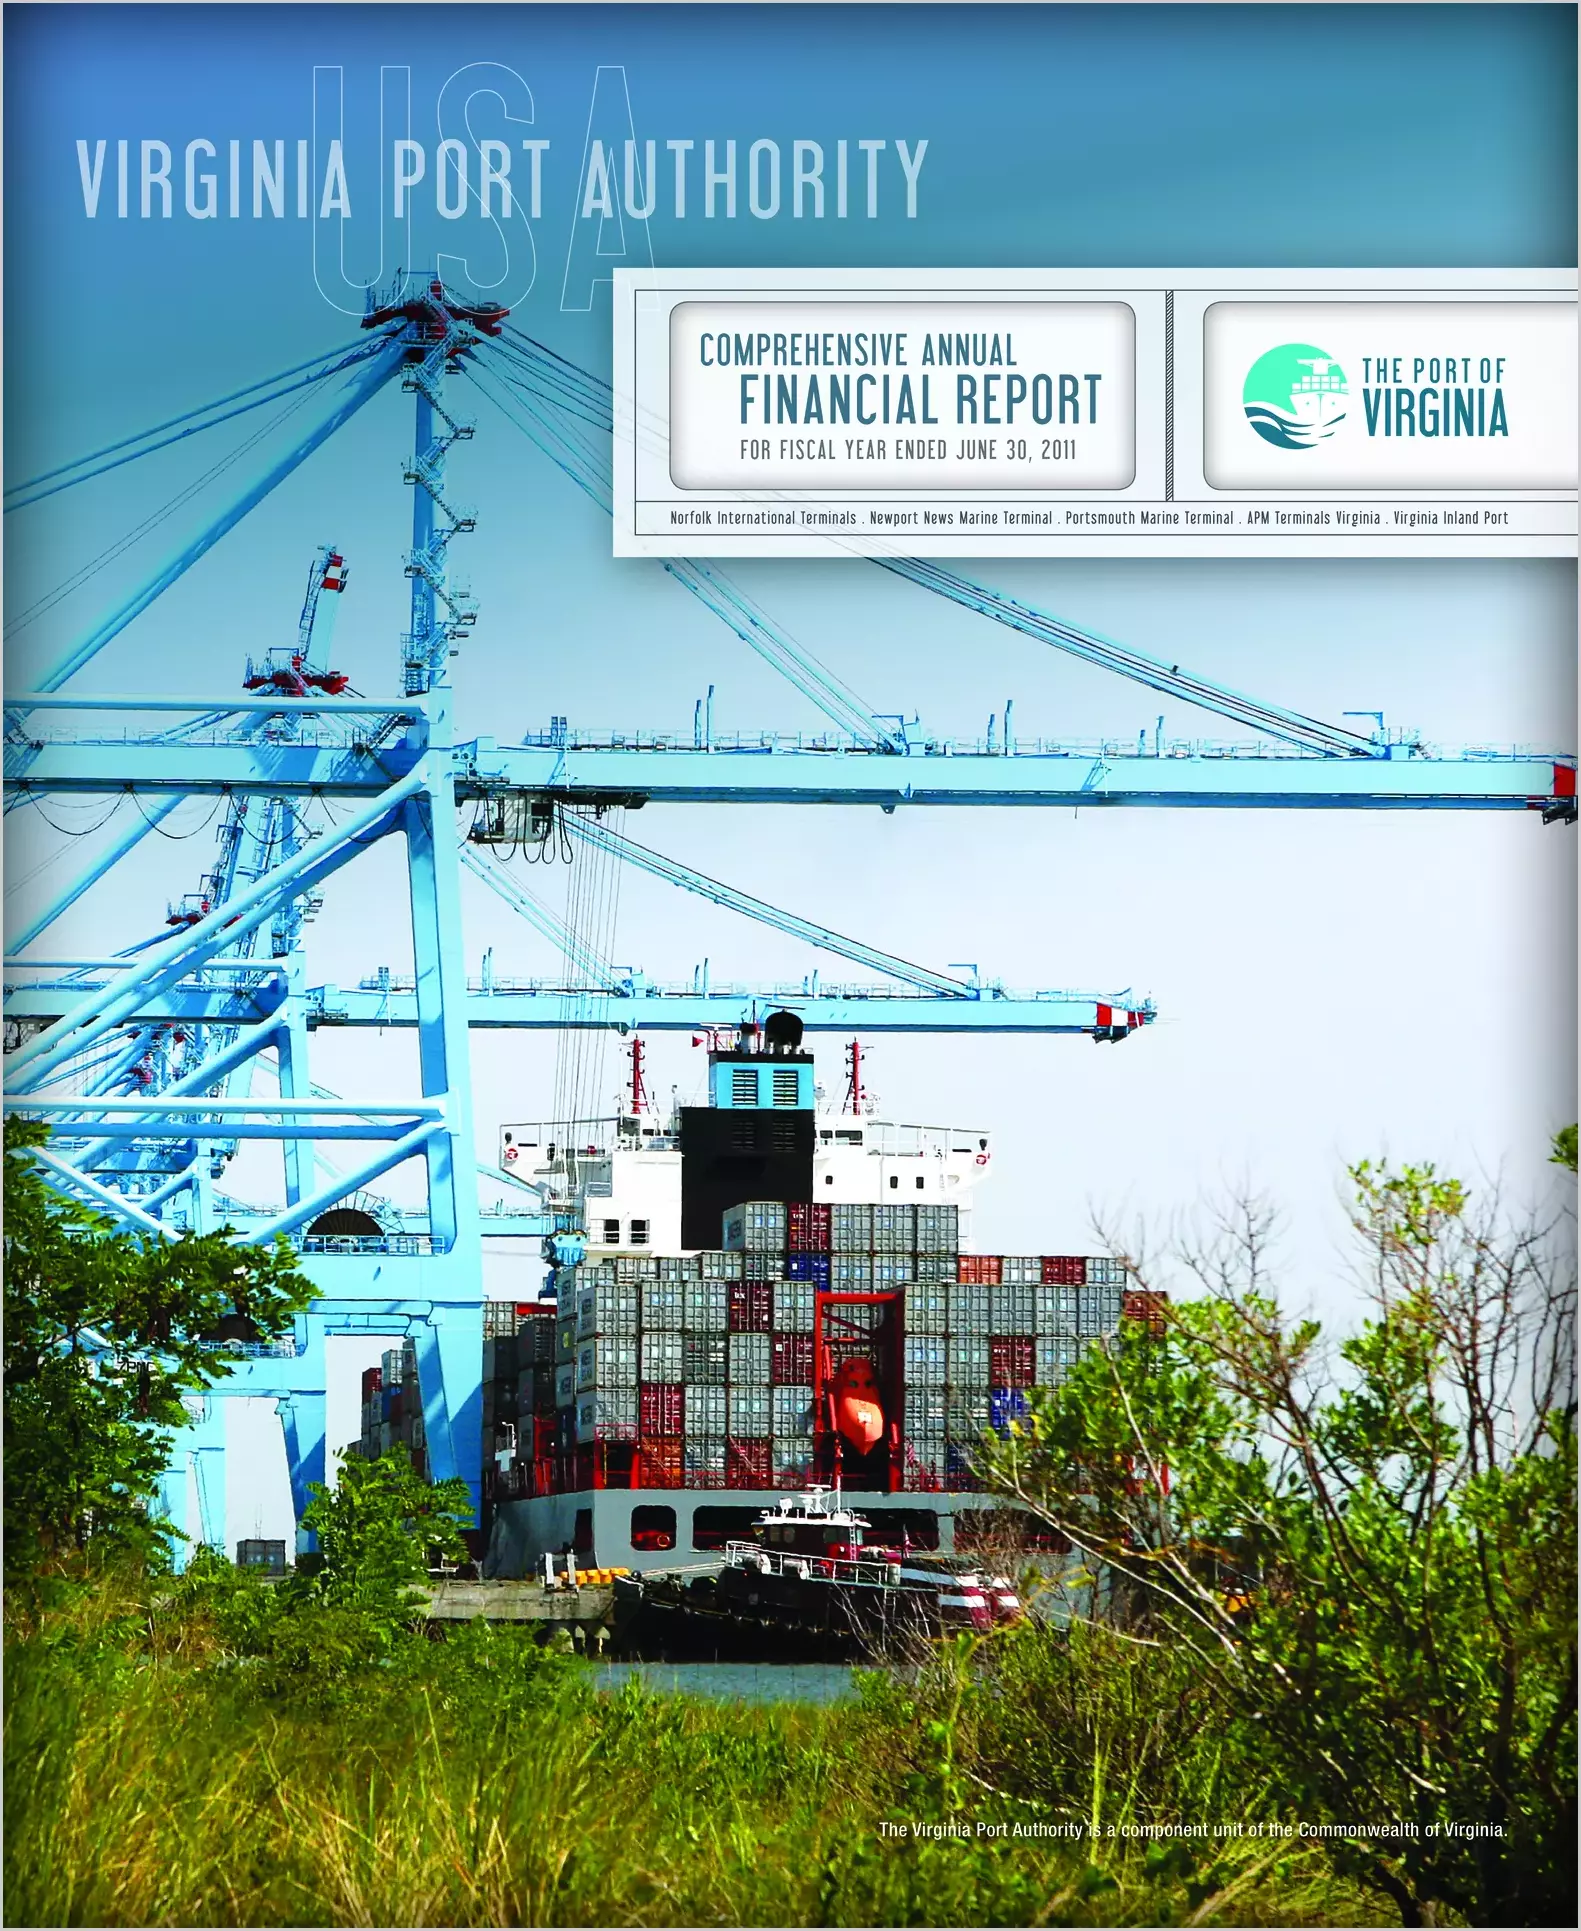 Virginia Port Authority Financial Statements Report for the year ended June 30, 2011